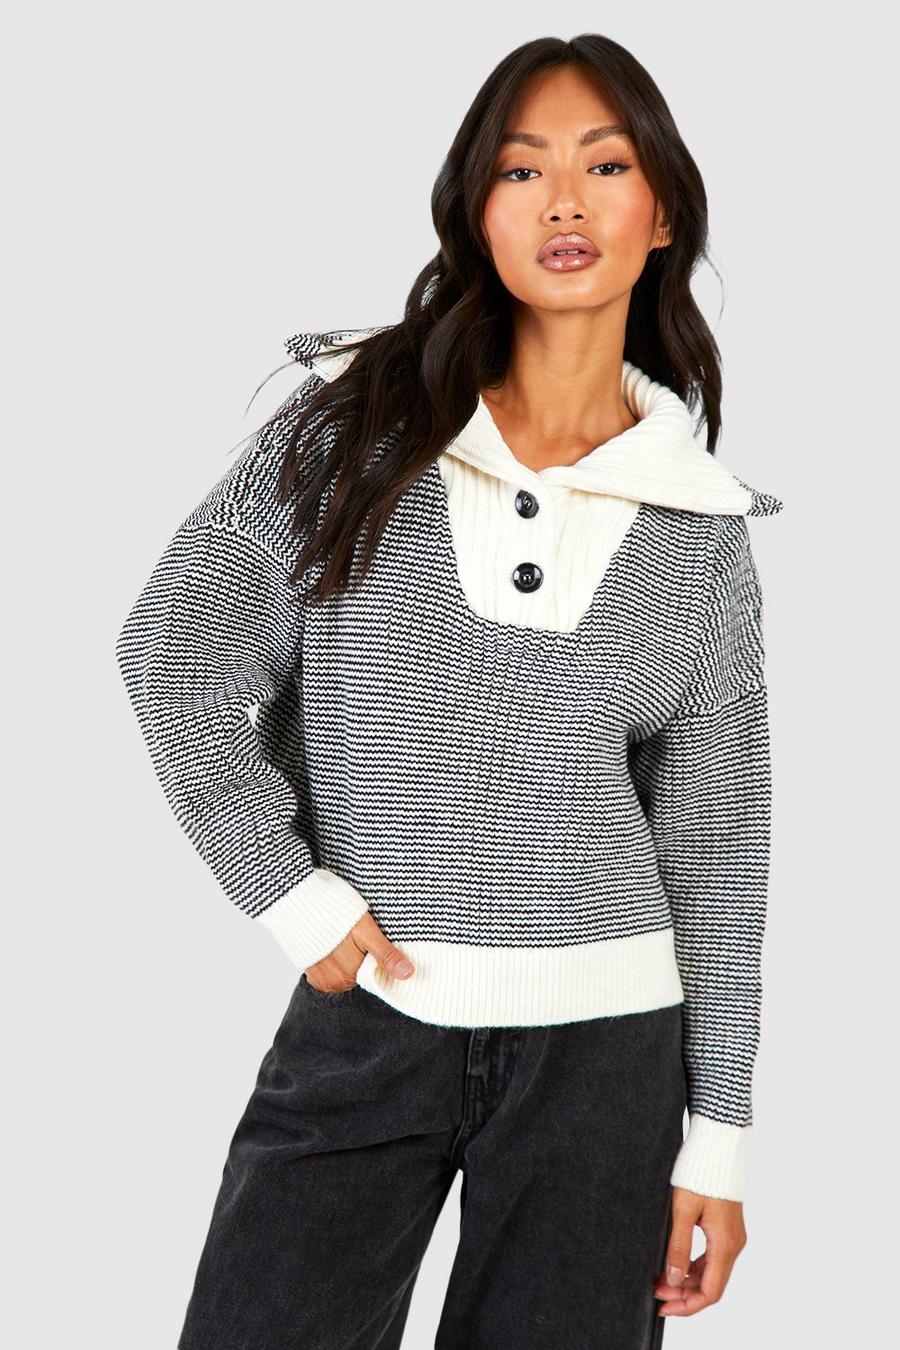 This Cute Oversized Sweater Is 49% Off at